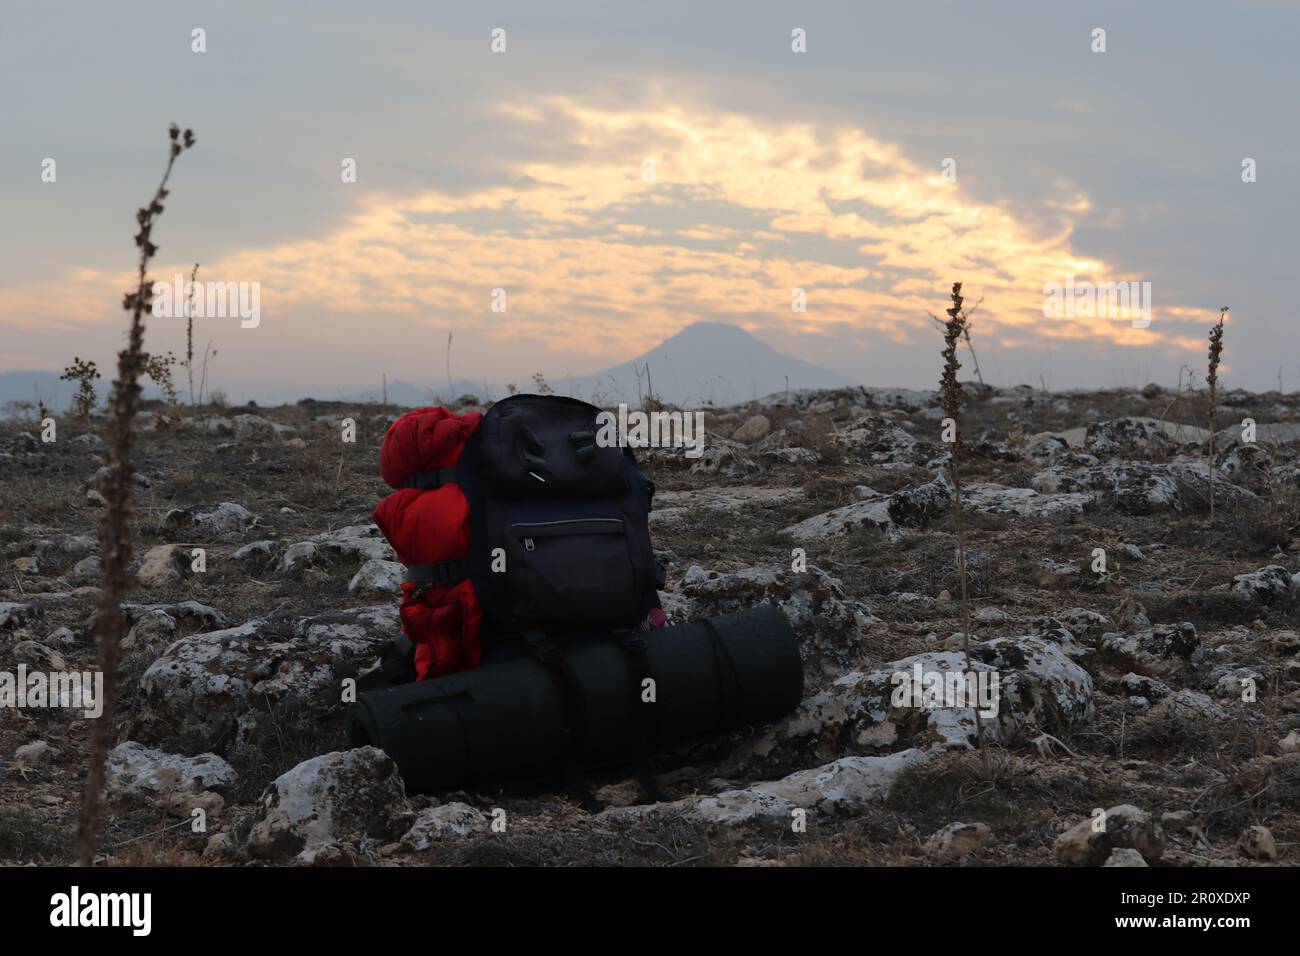 hiking at sunset, high mountain and backpack standing on the ground Stock Photo